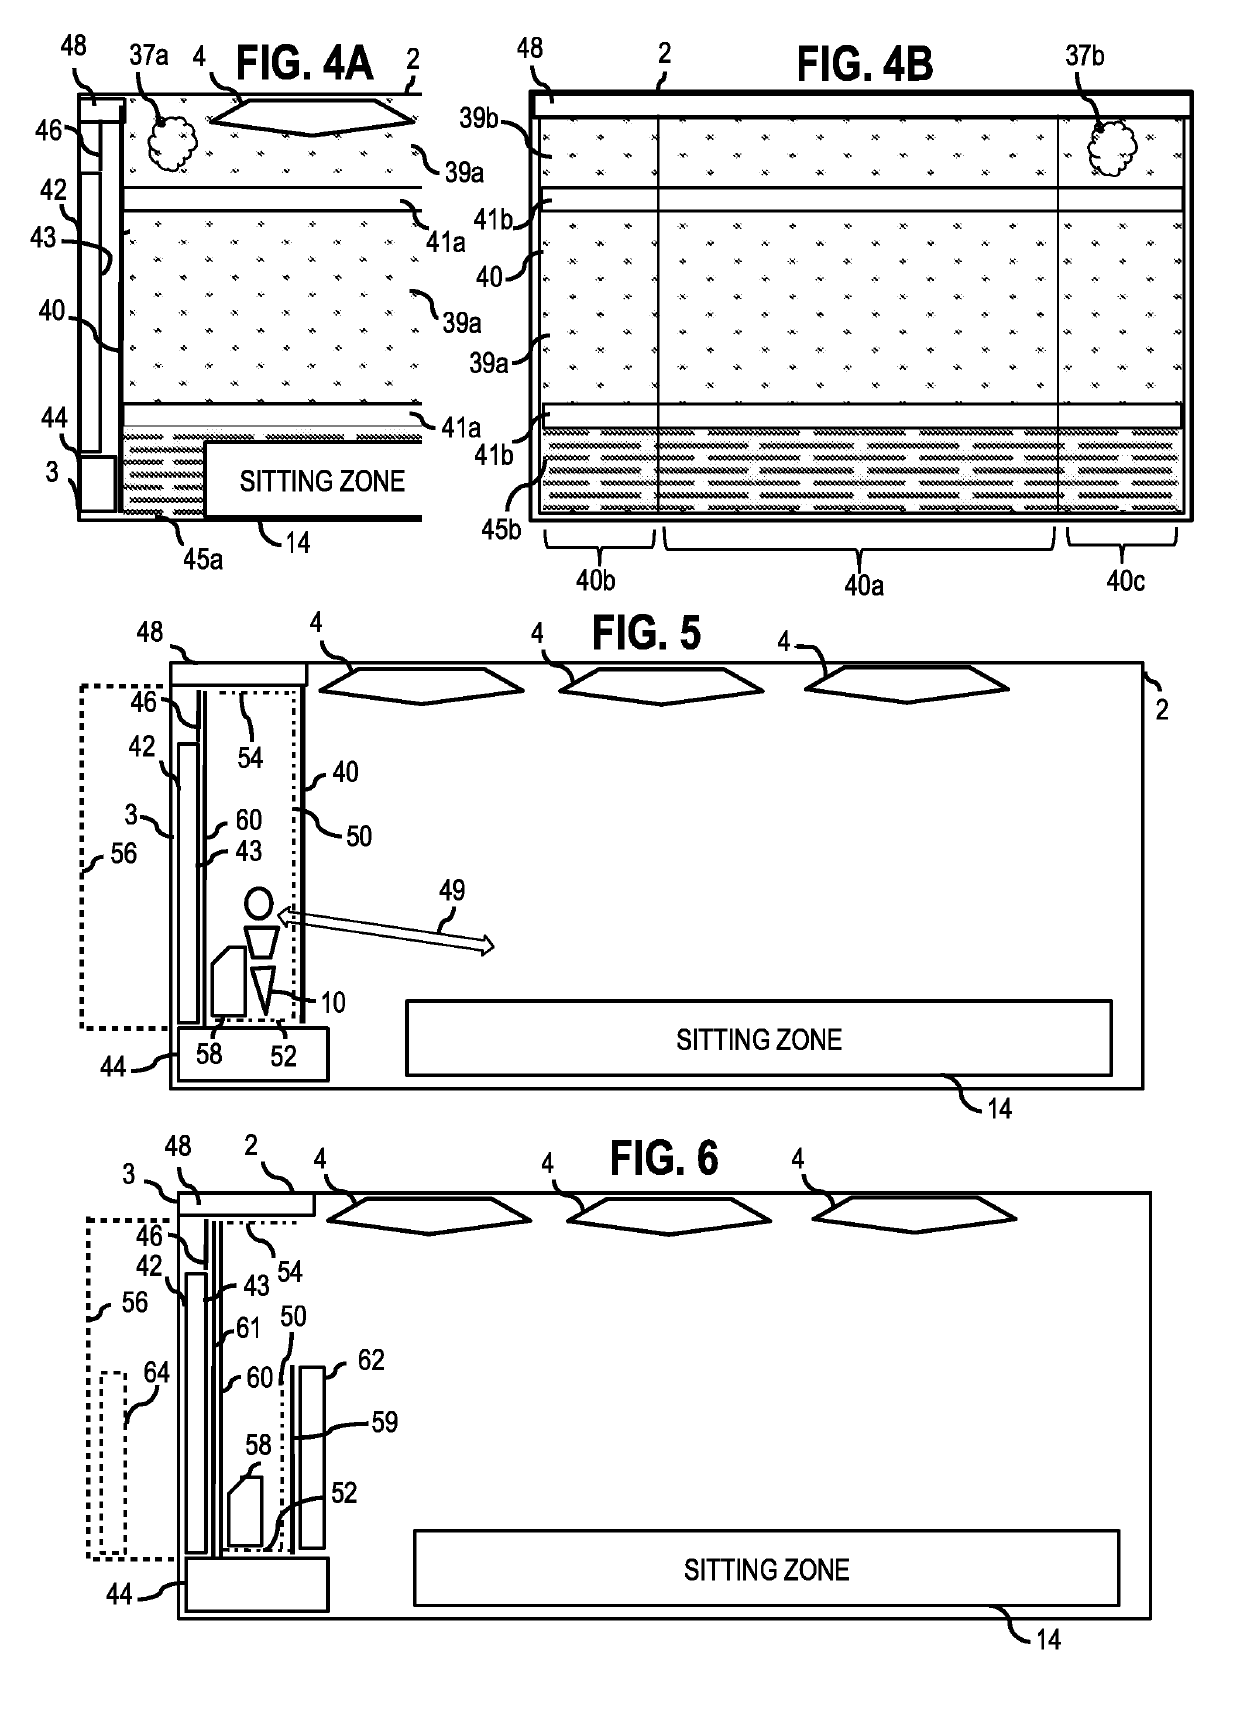 Communication stage and display systems